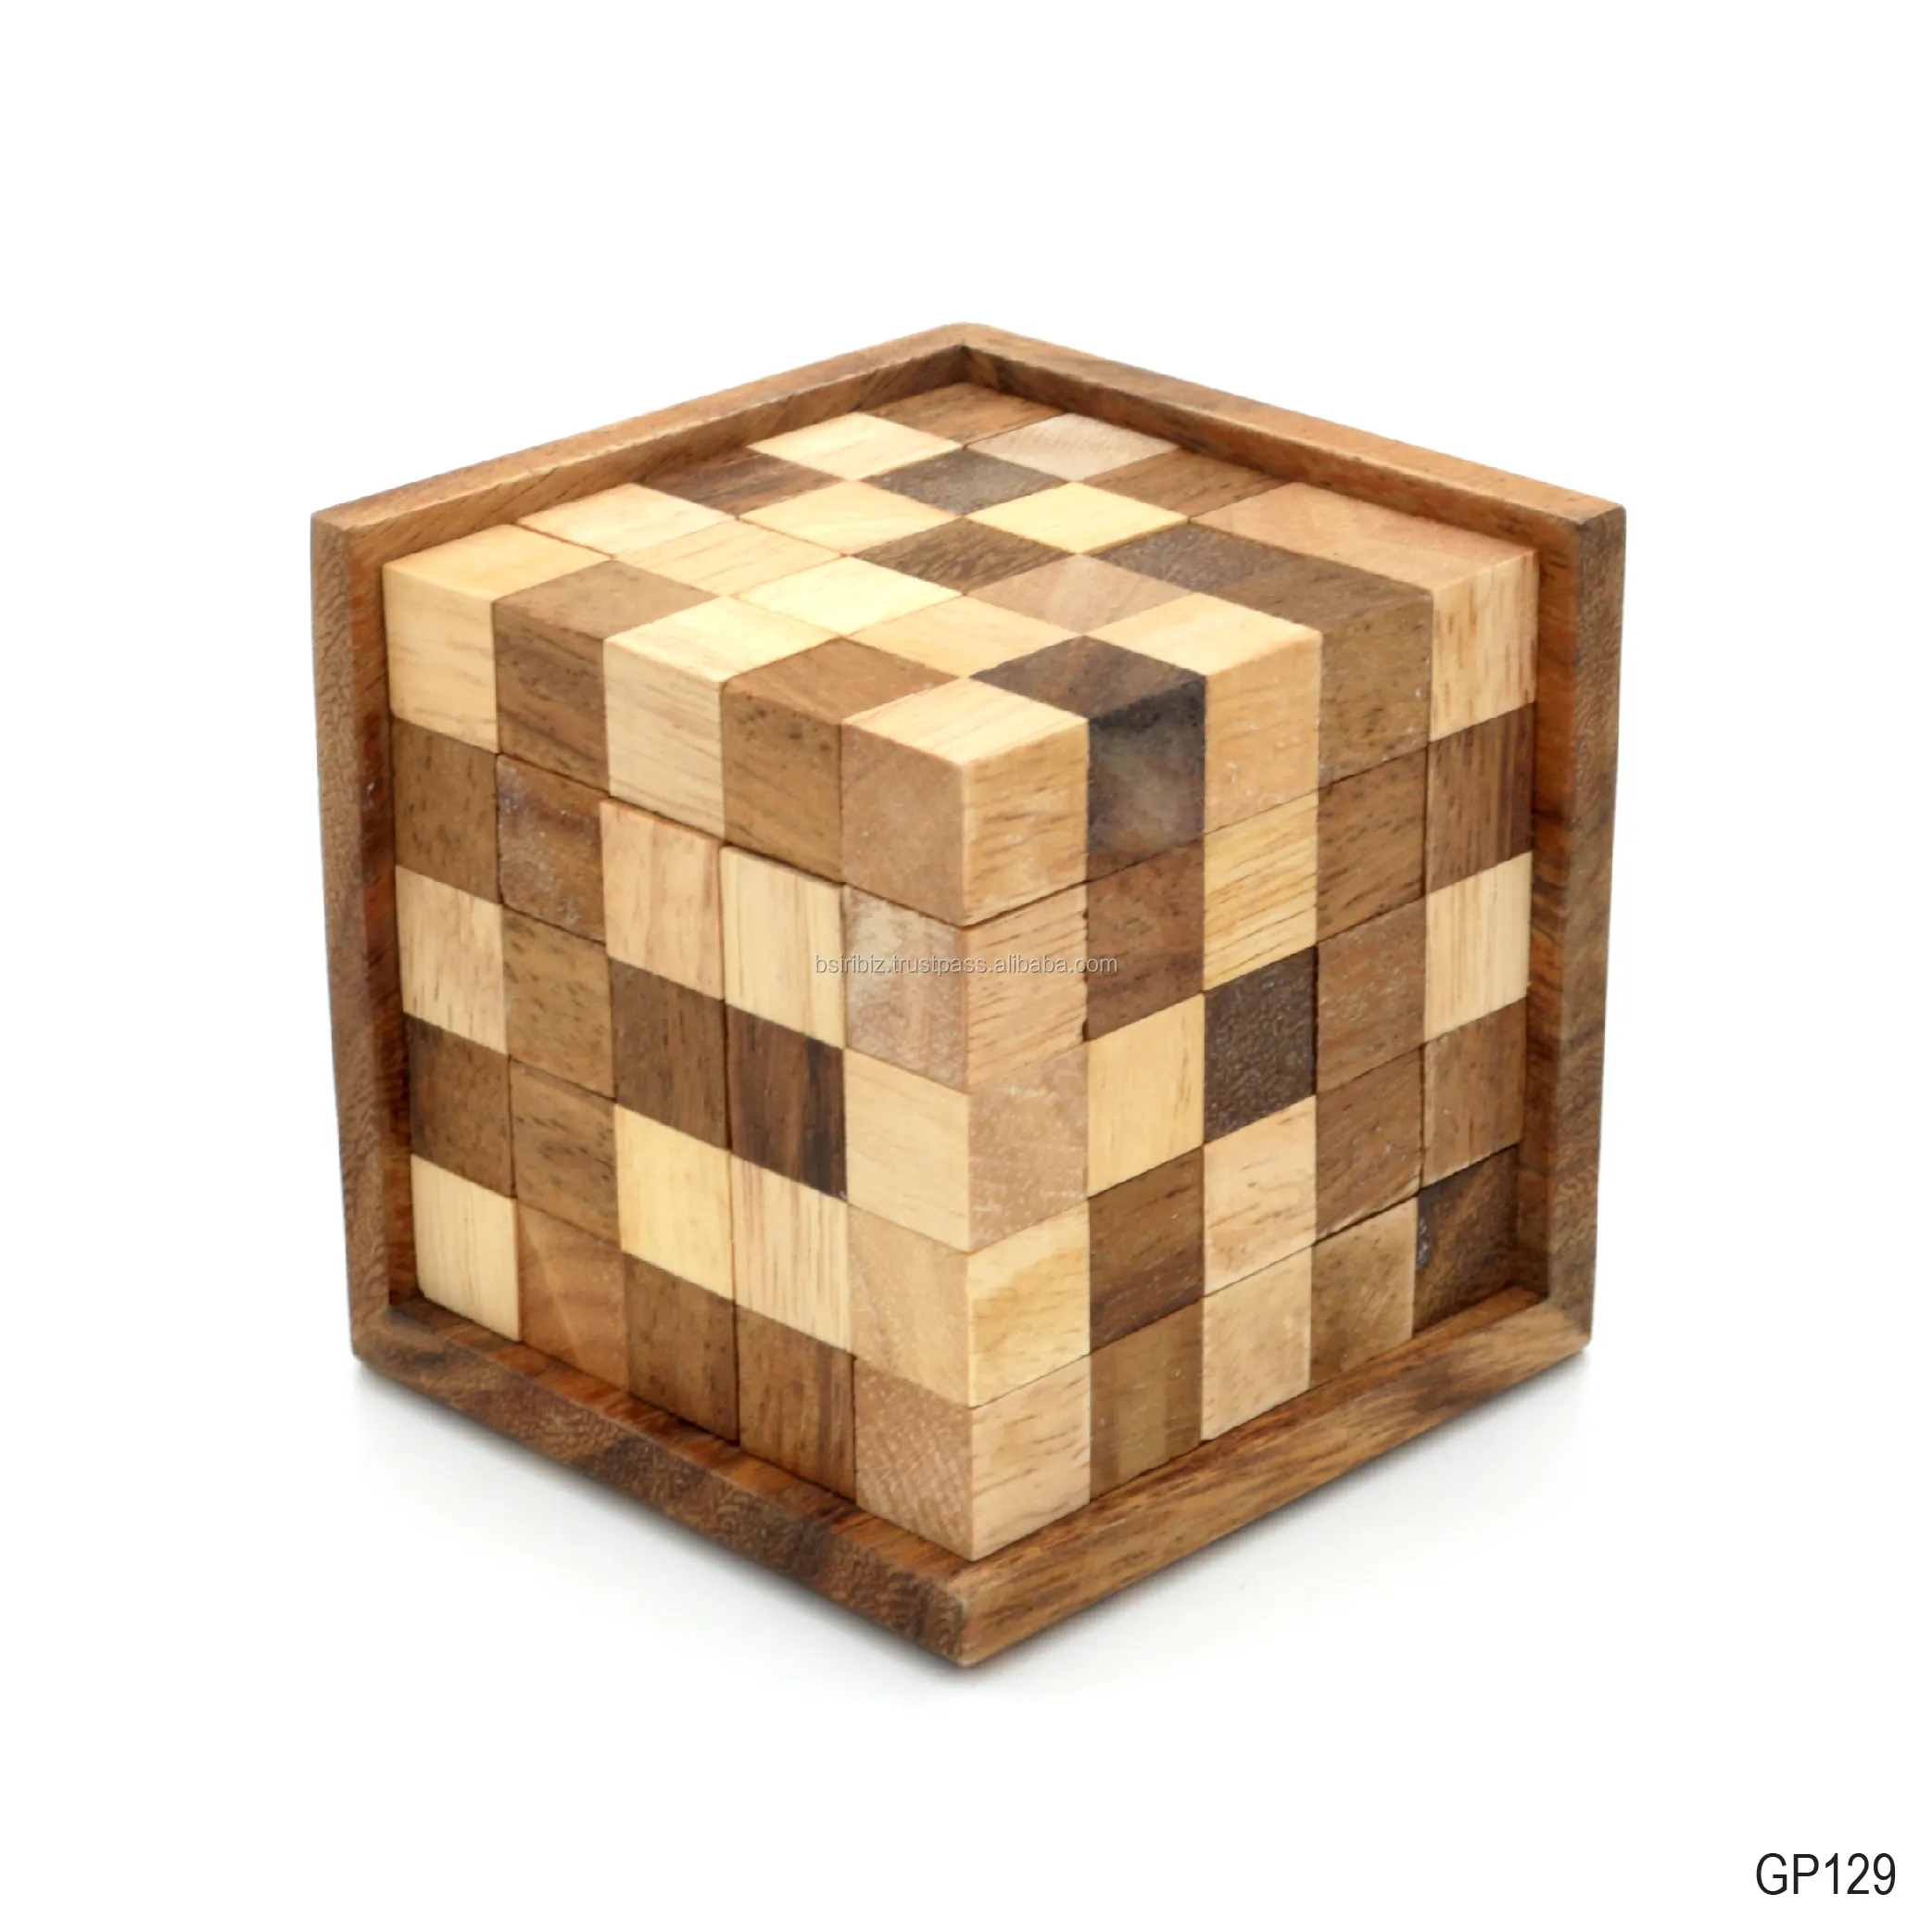 Pentominoes 3D Cube Made of Natural Wooden Craft Design for Challenging Brain Tease Thinking of Adults and Kids